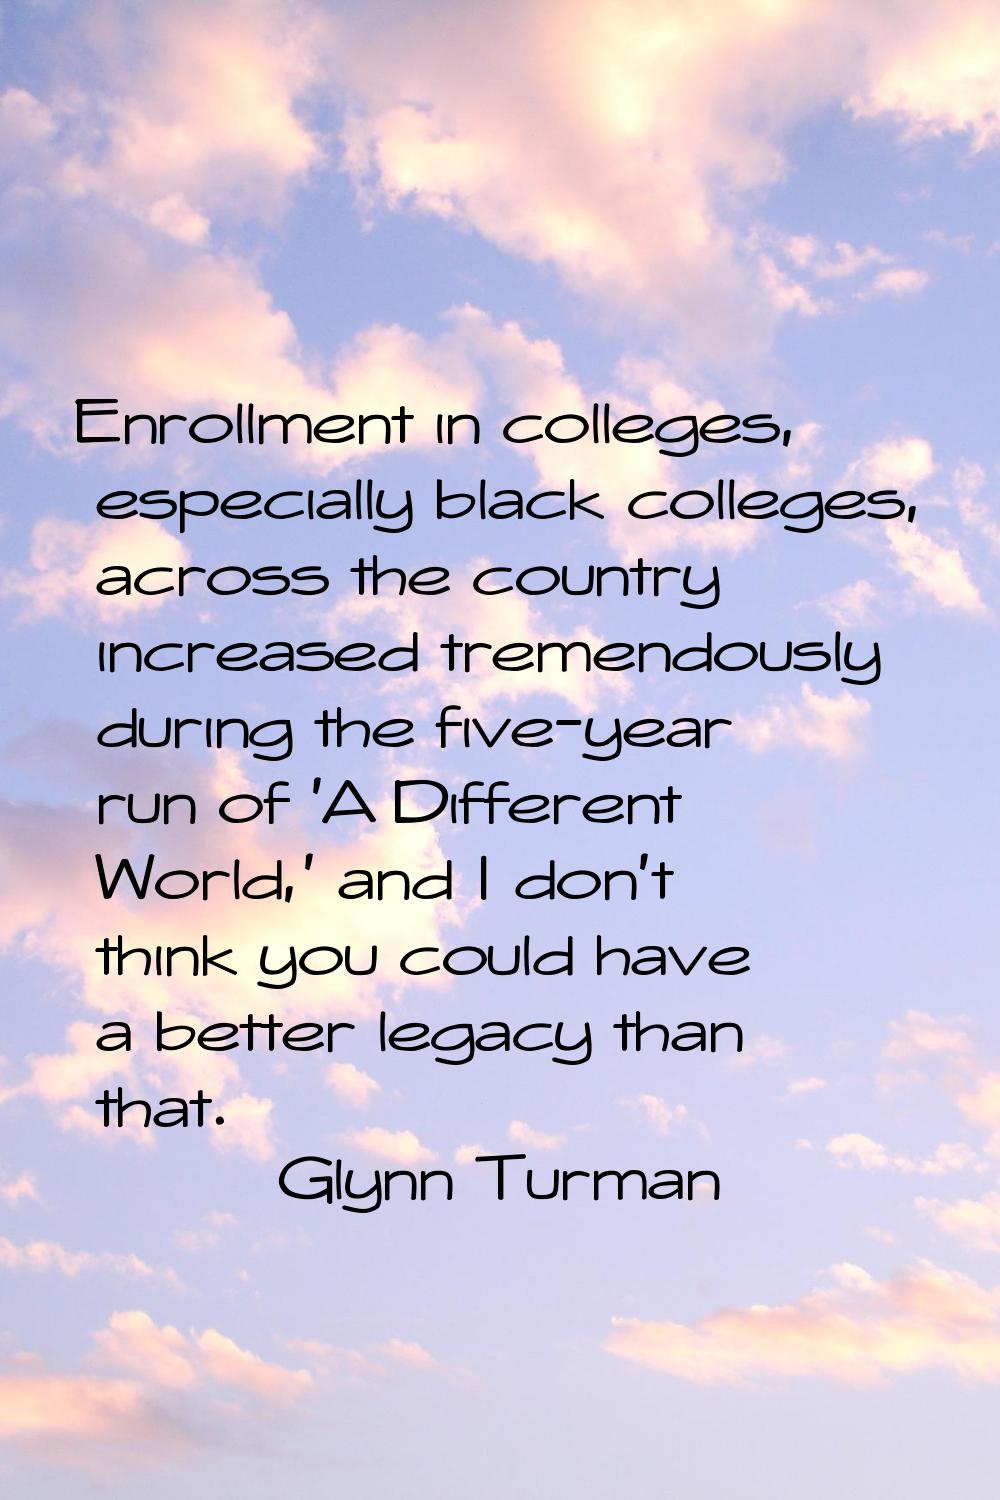 Enrollment in colleges, especially black colleges, across the country increased tremendously during